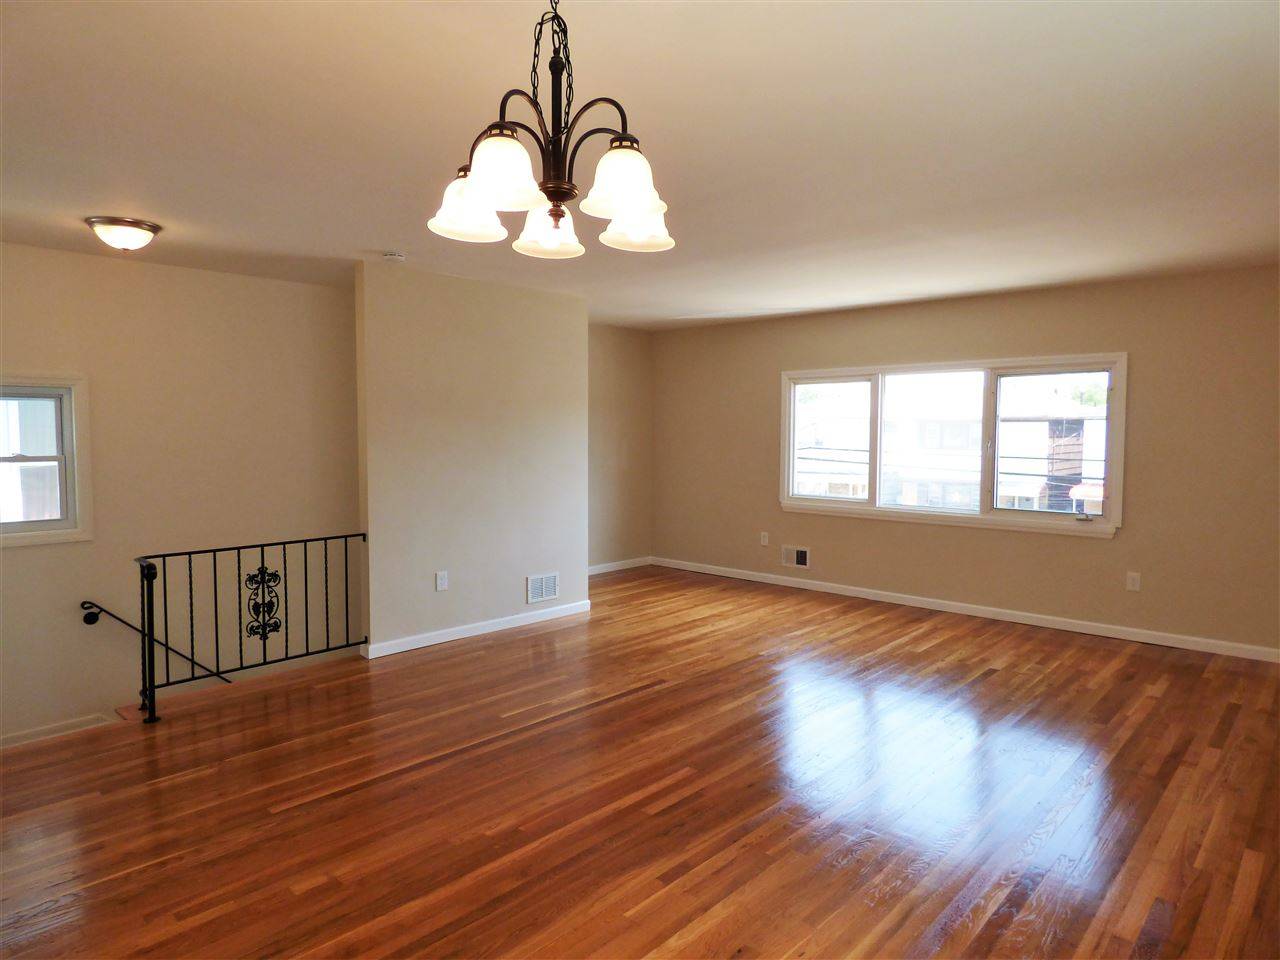 This spacious 1 bedroom apartment features gleaming hardwood floors